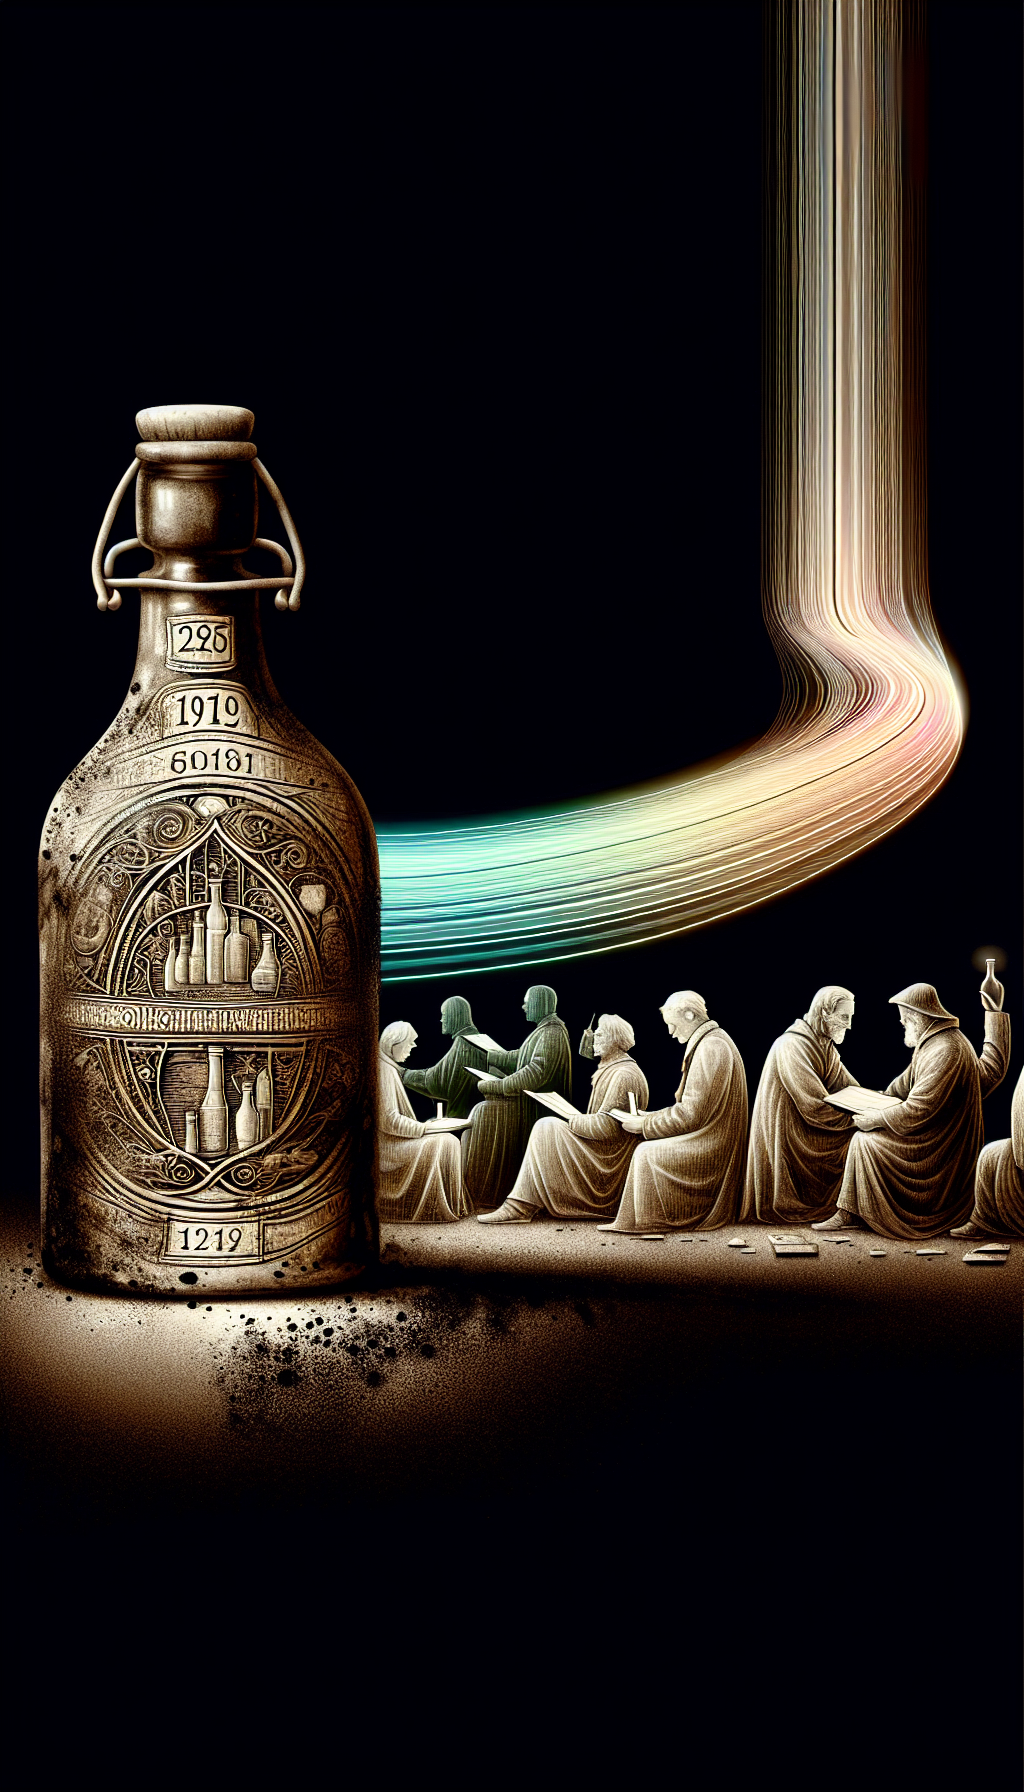 An illustration featuring an aged, partially buried glass bottle with intricate embossing, revealing historical labels and makers' marks that morph into a timeline unfurling into the distance. Accompanying the timeline are ghostly images of people from different eras examining the bottle, symbolizing the evolution of identification methods, with each figure representing a distinct artistic style from their respective periods.